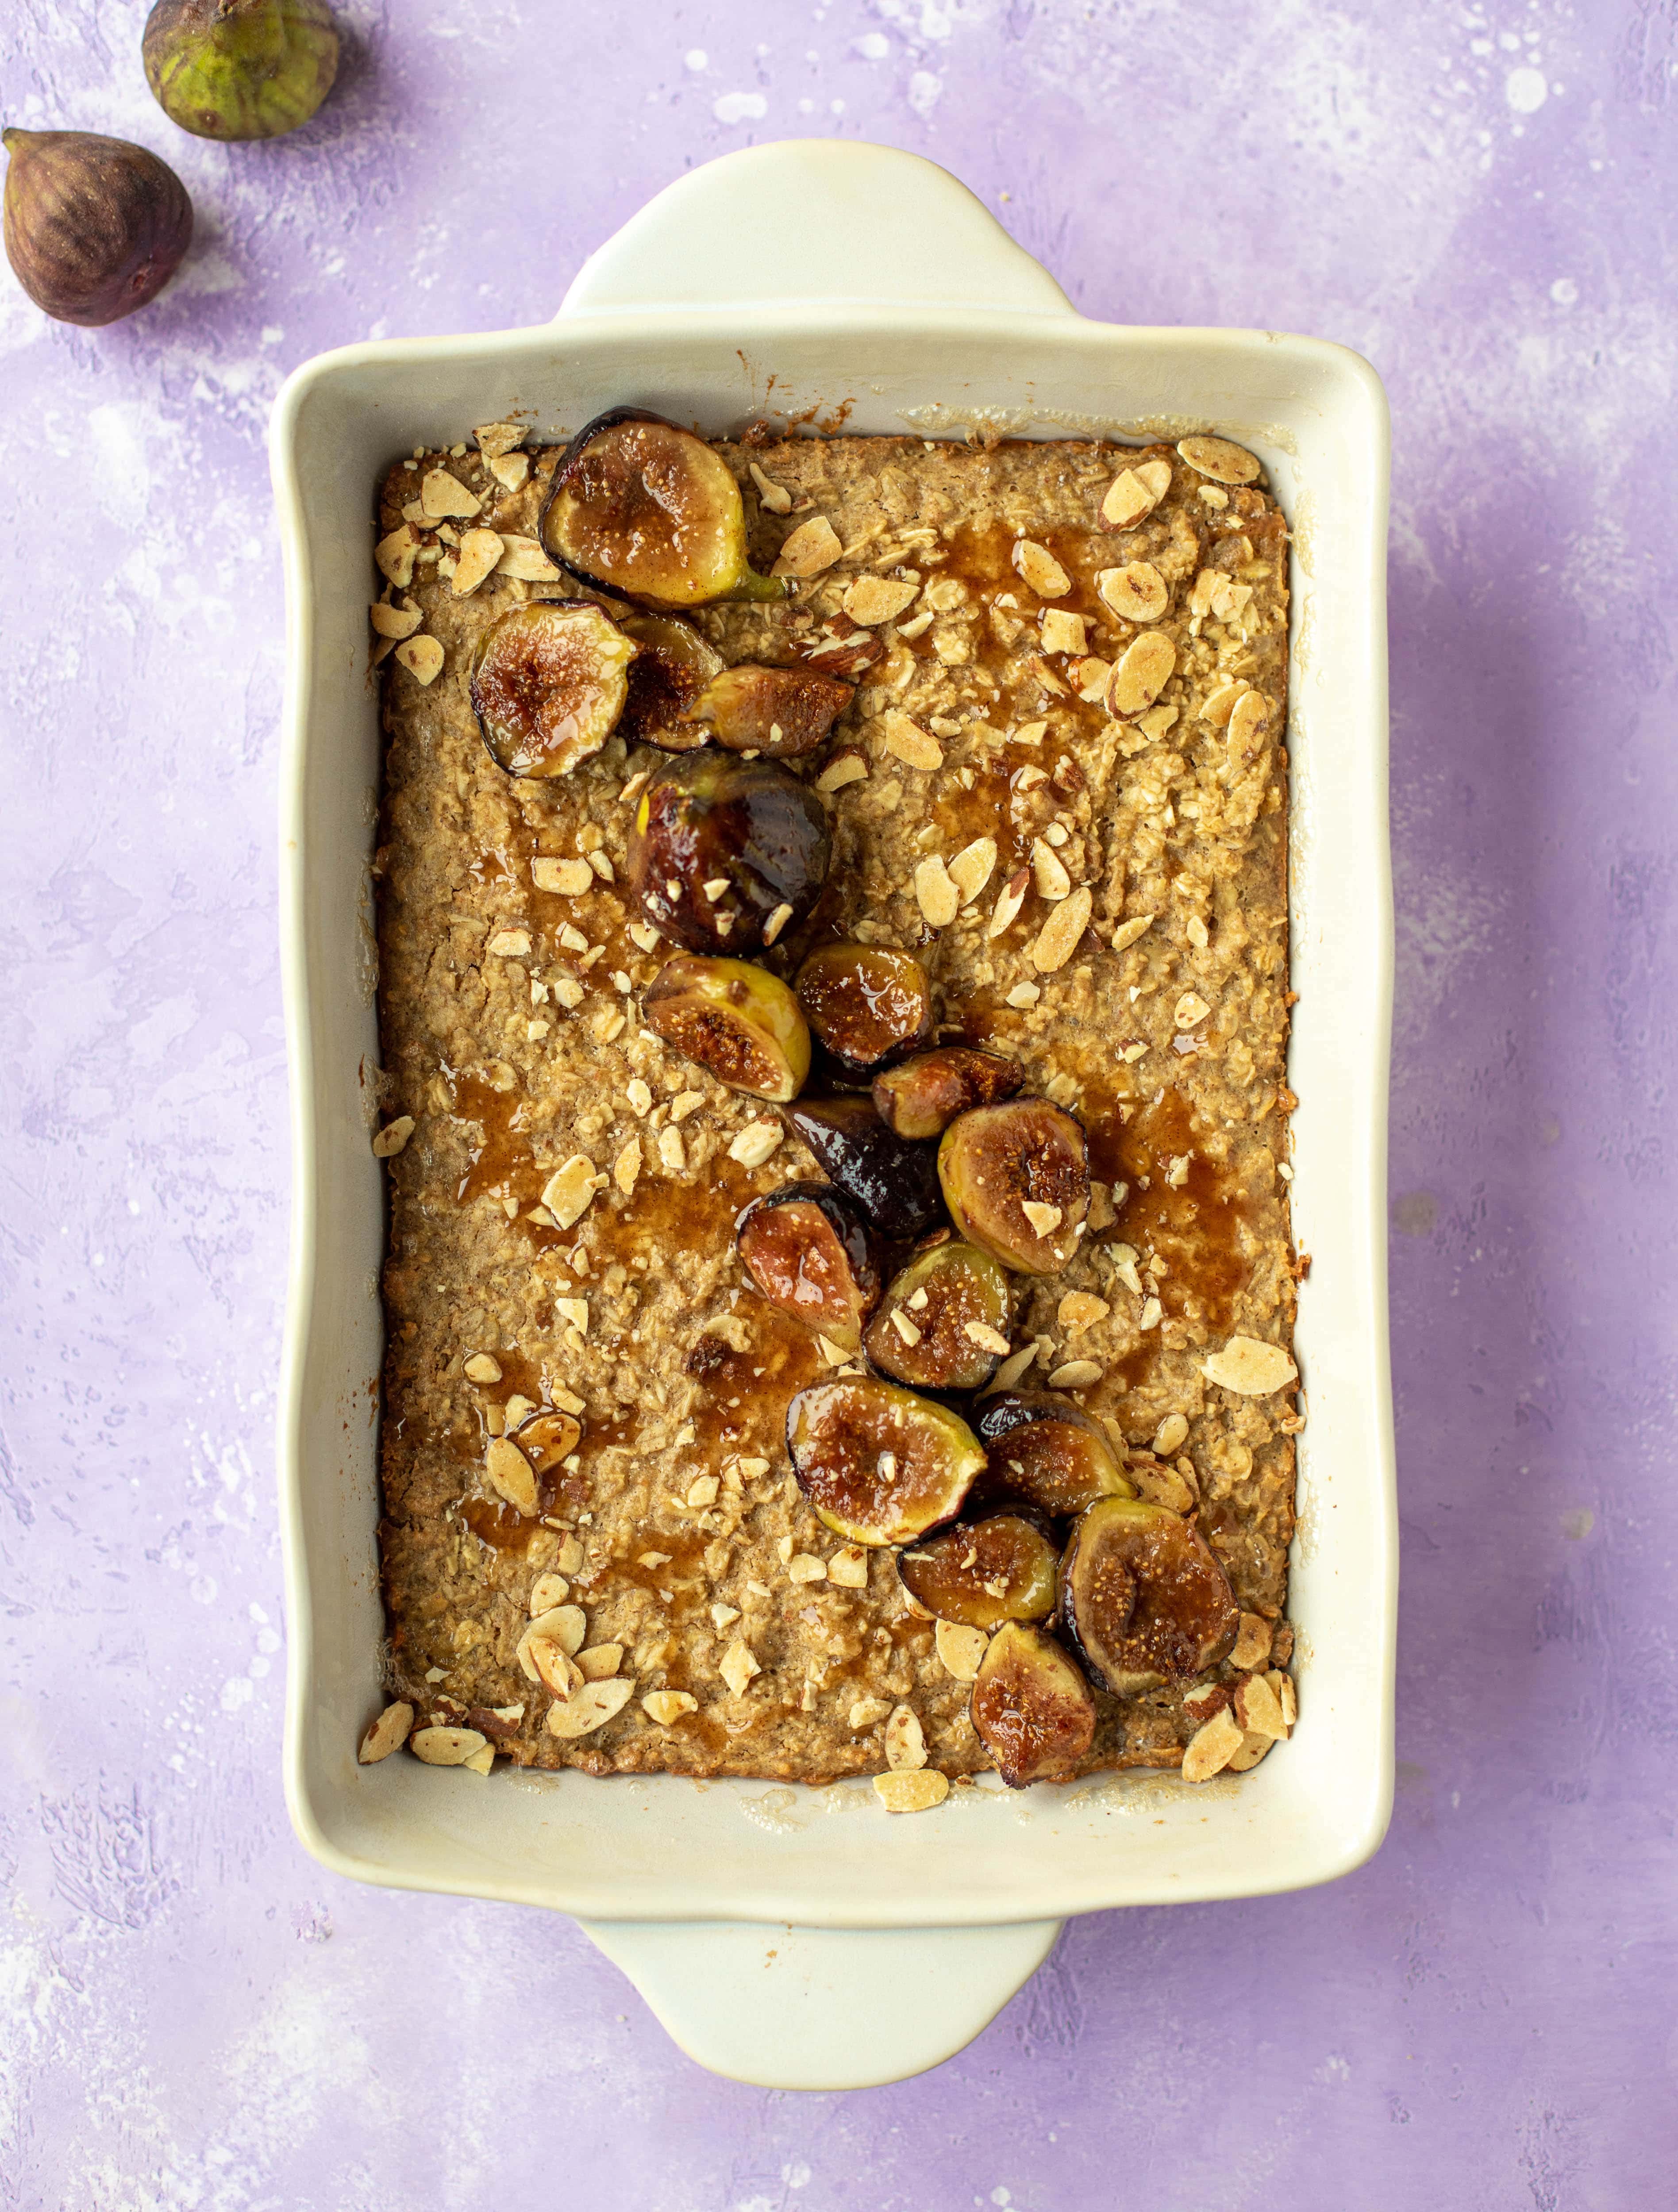 This almond butter baked oatmeal with sticky cinnamon figs is the perfect weekend treat or great for when you have brunch guests!